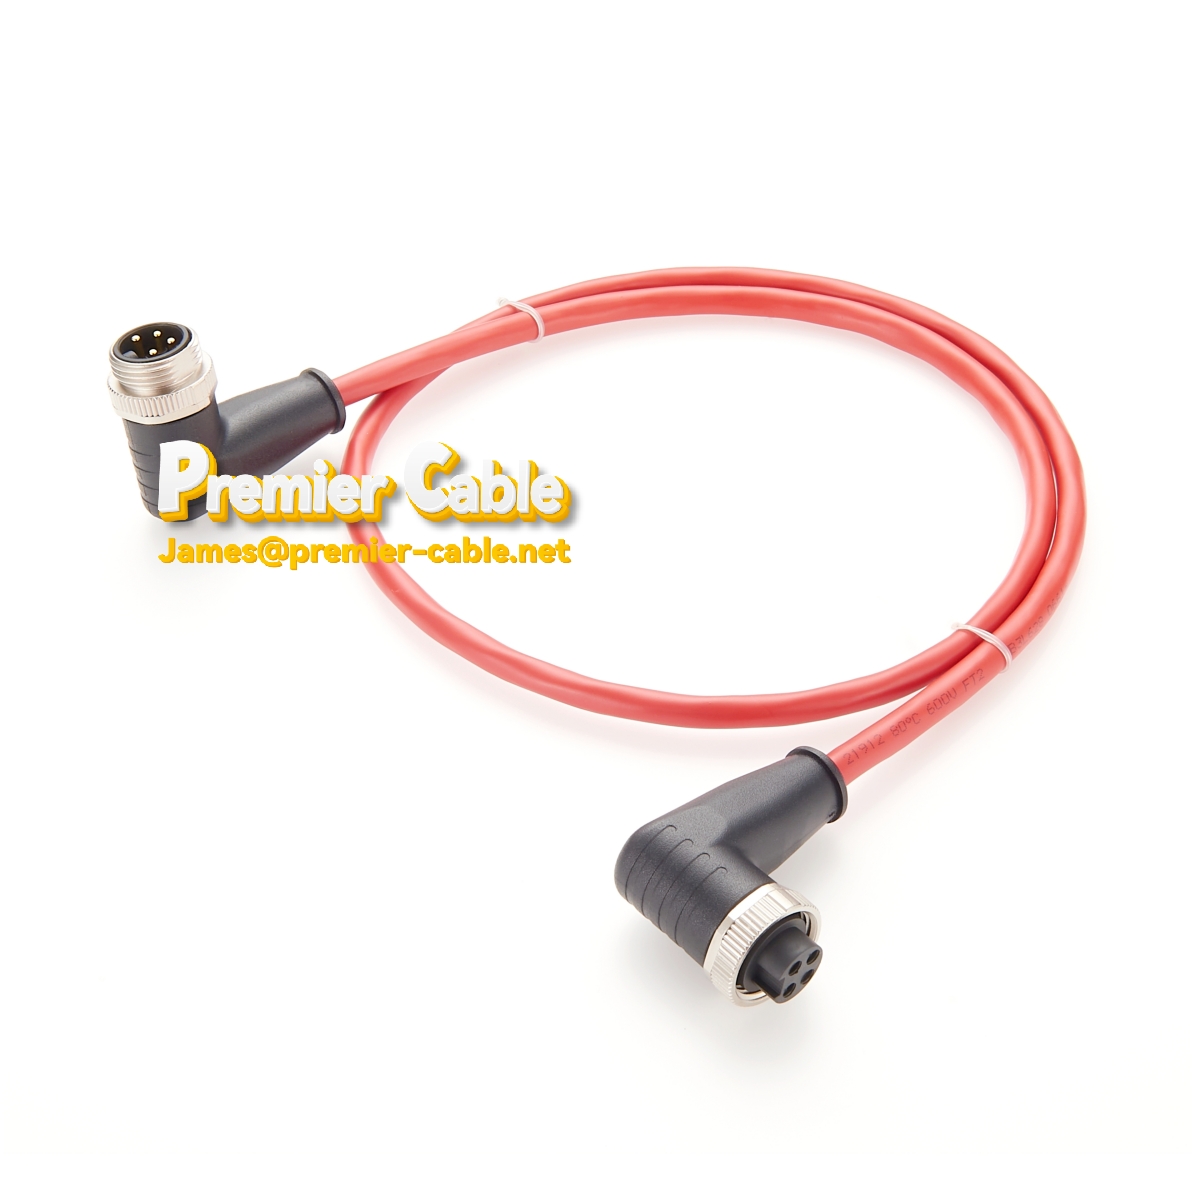 CC-Link cable with 4-pin 7/8